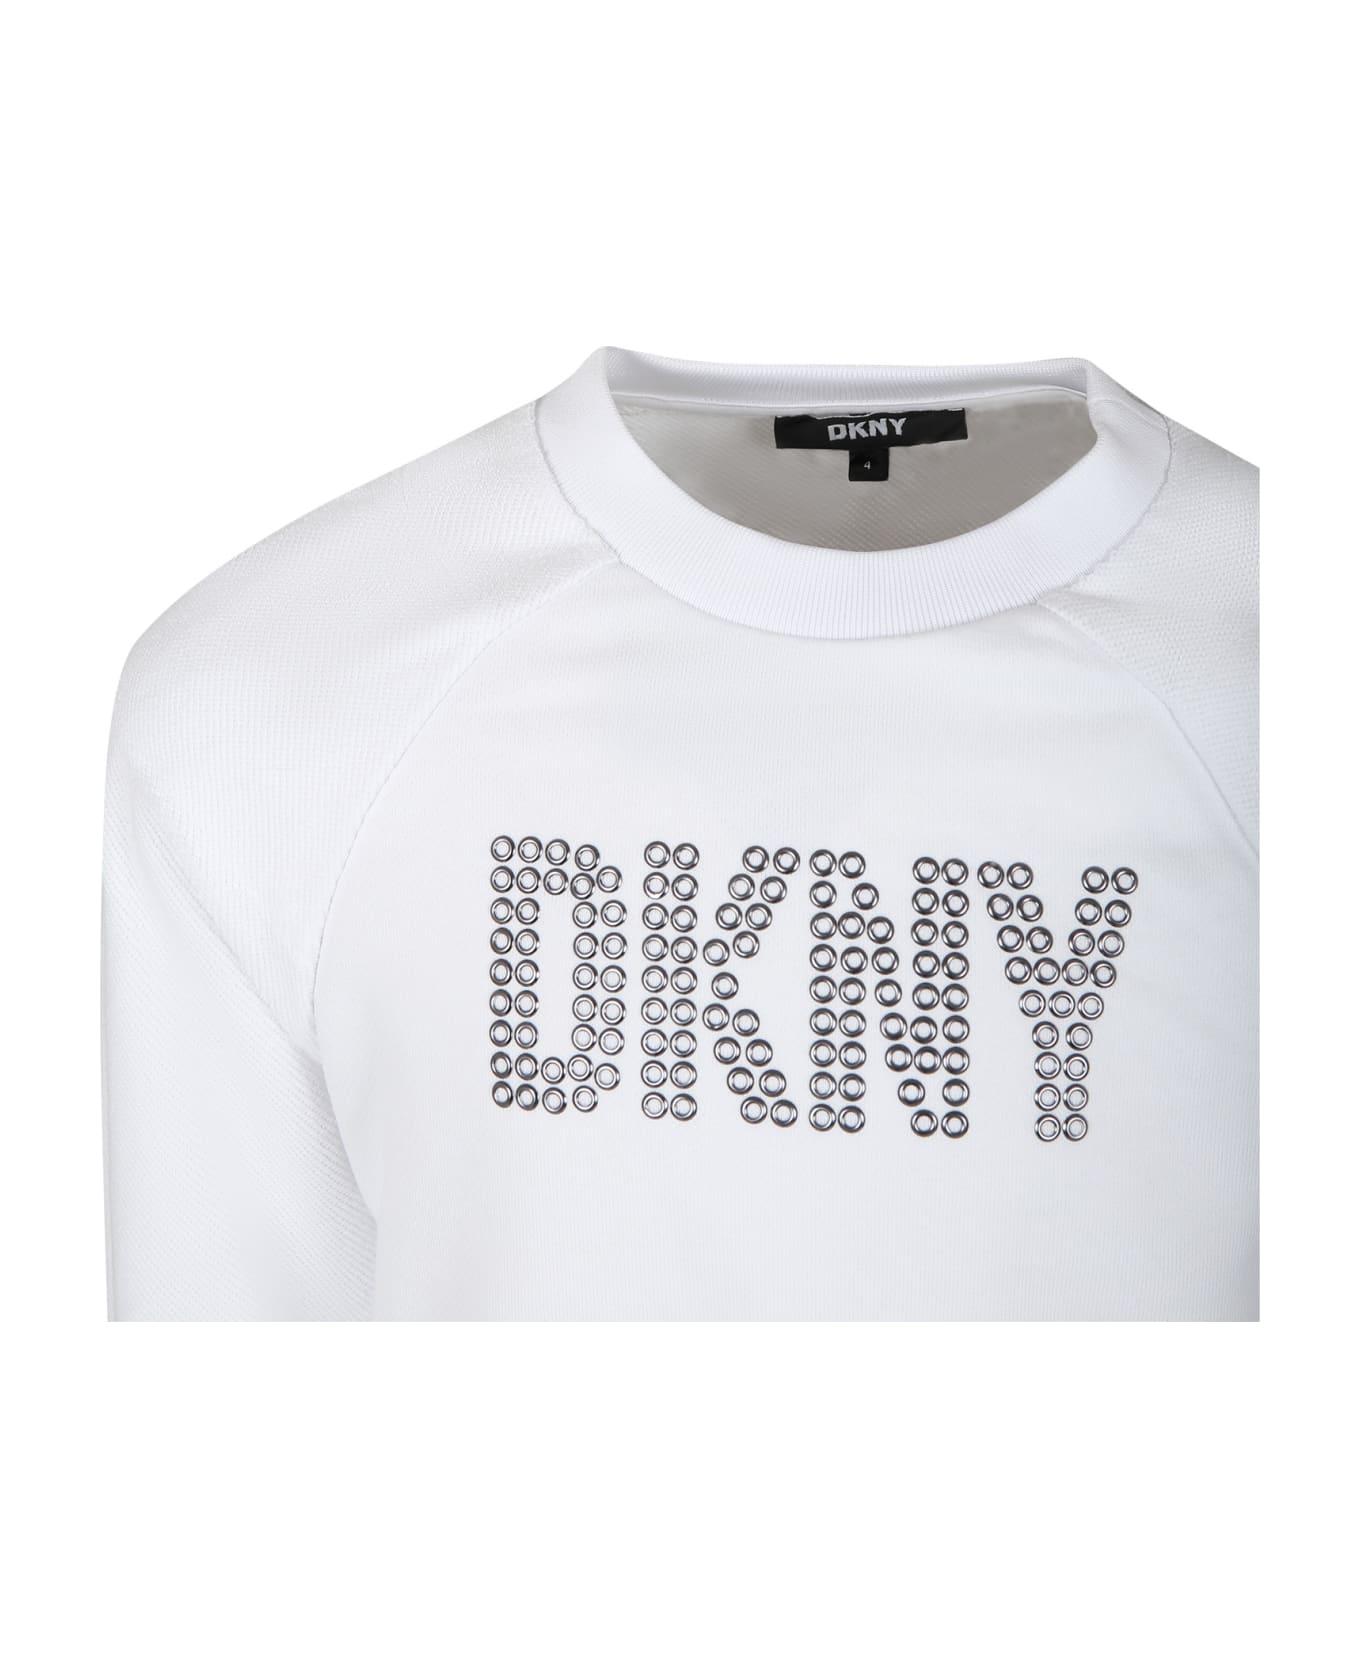 DKNY White Cropped Sweatshirt For Girl With Logo - White